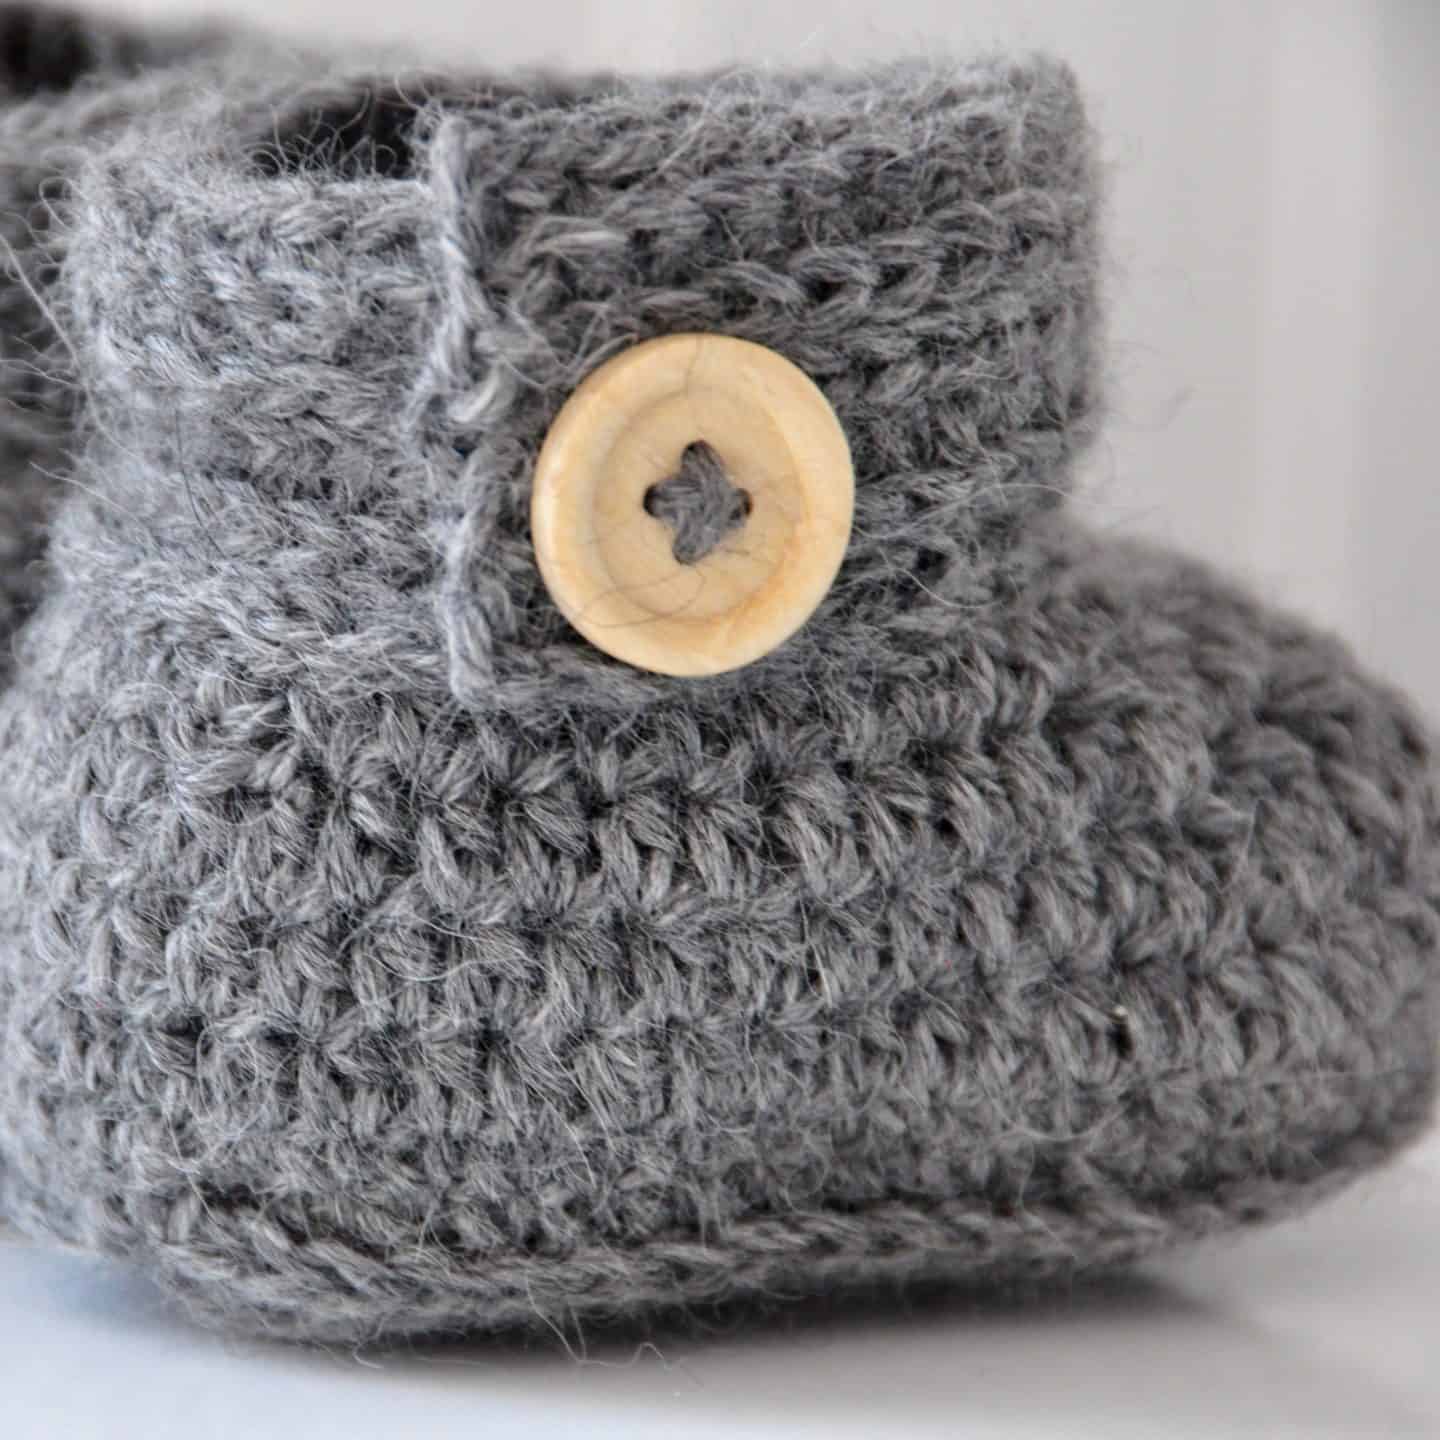 The Wrap Around Baby Boots - Free 